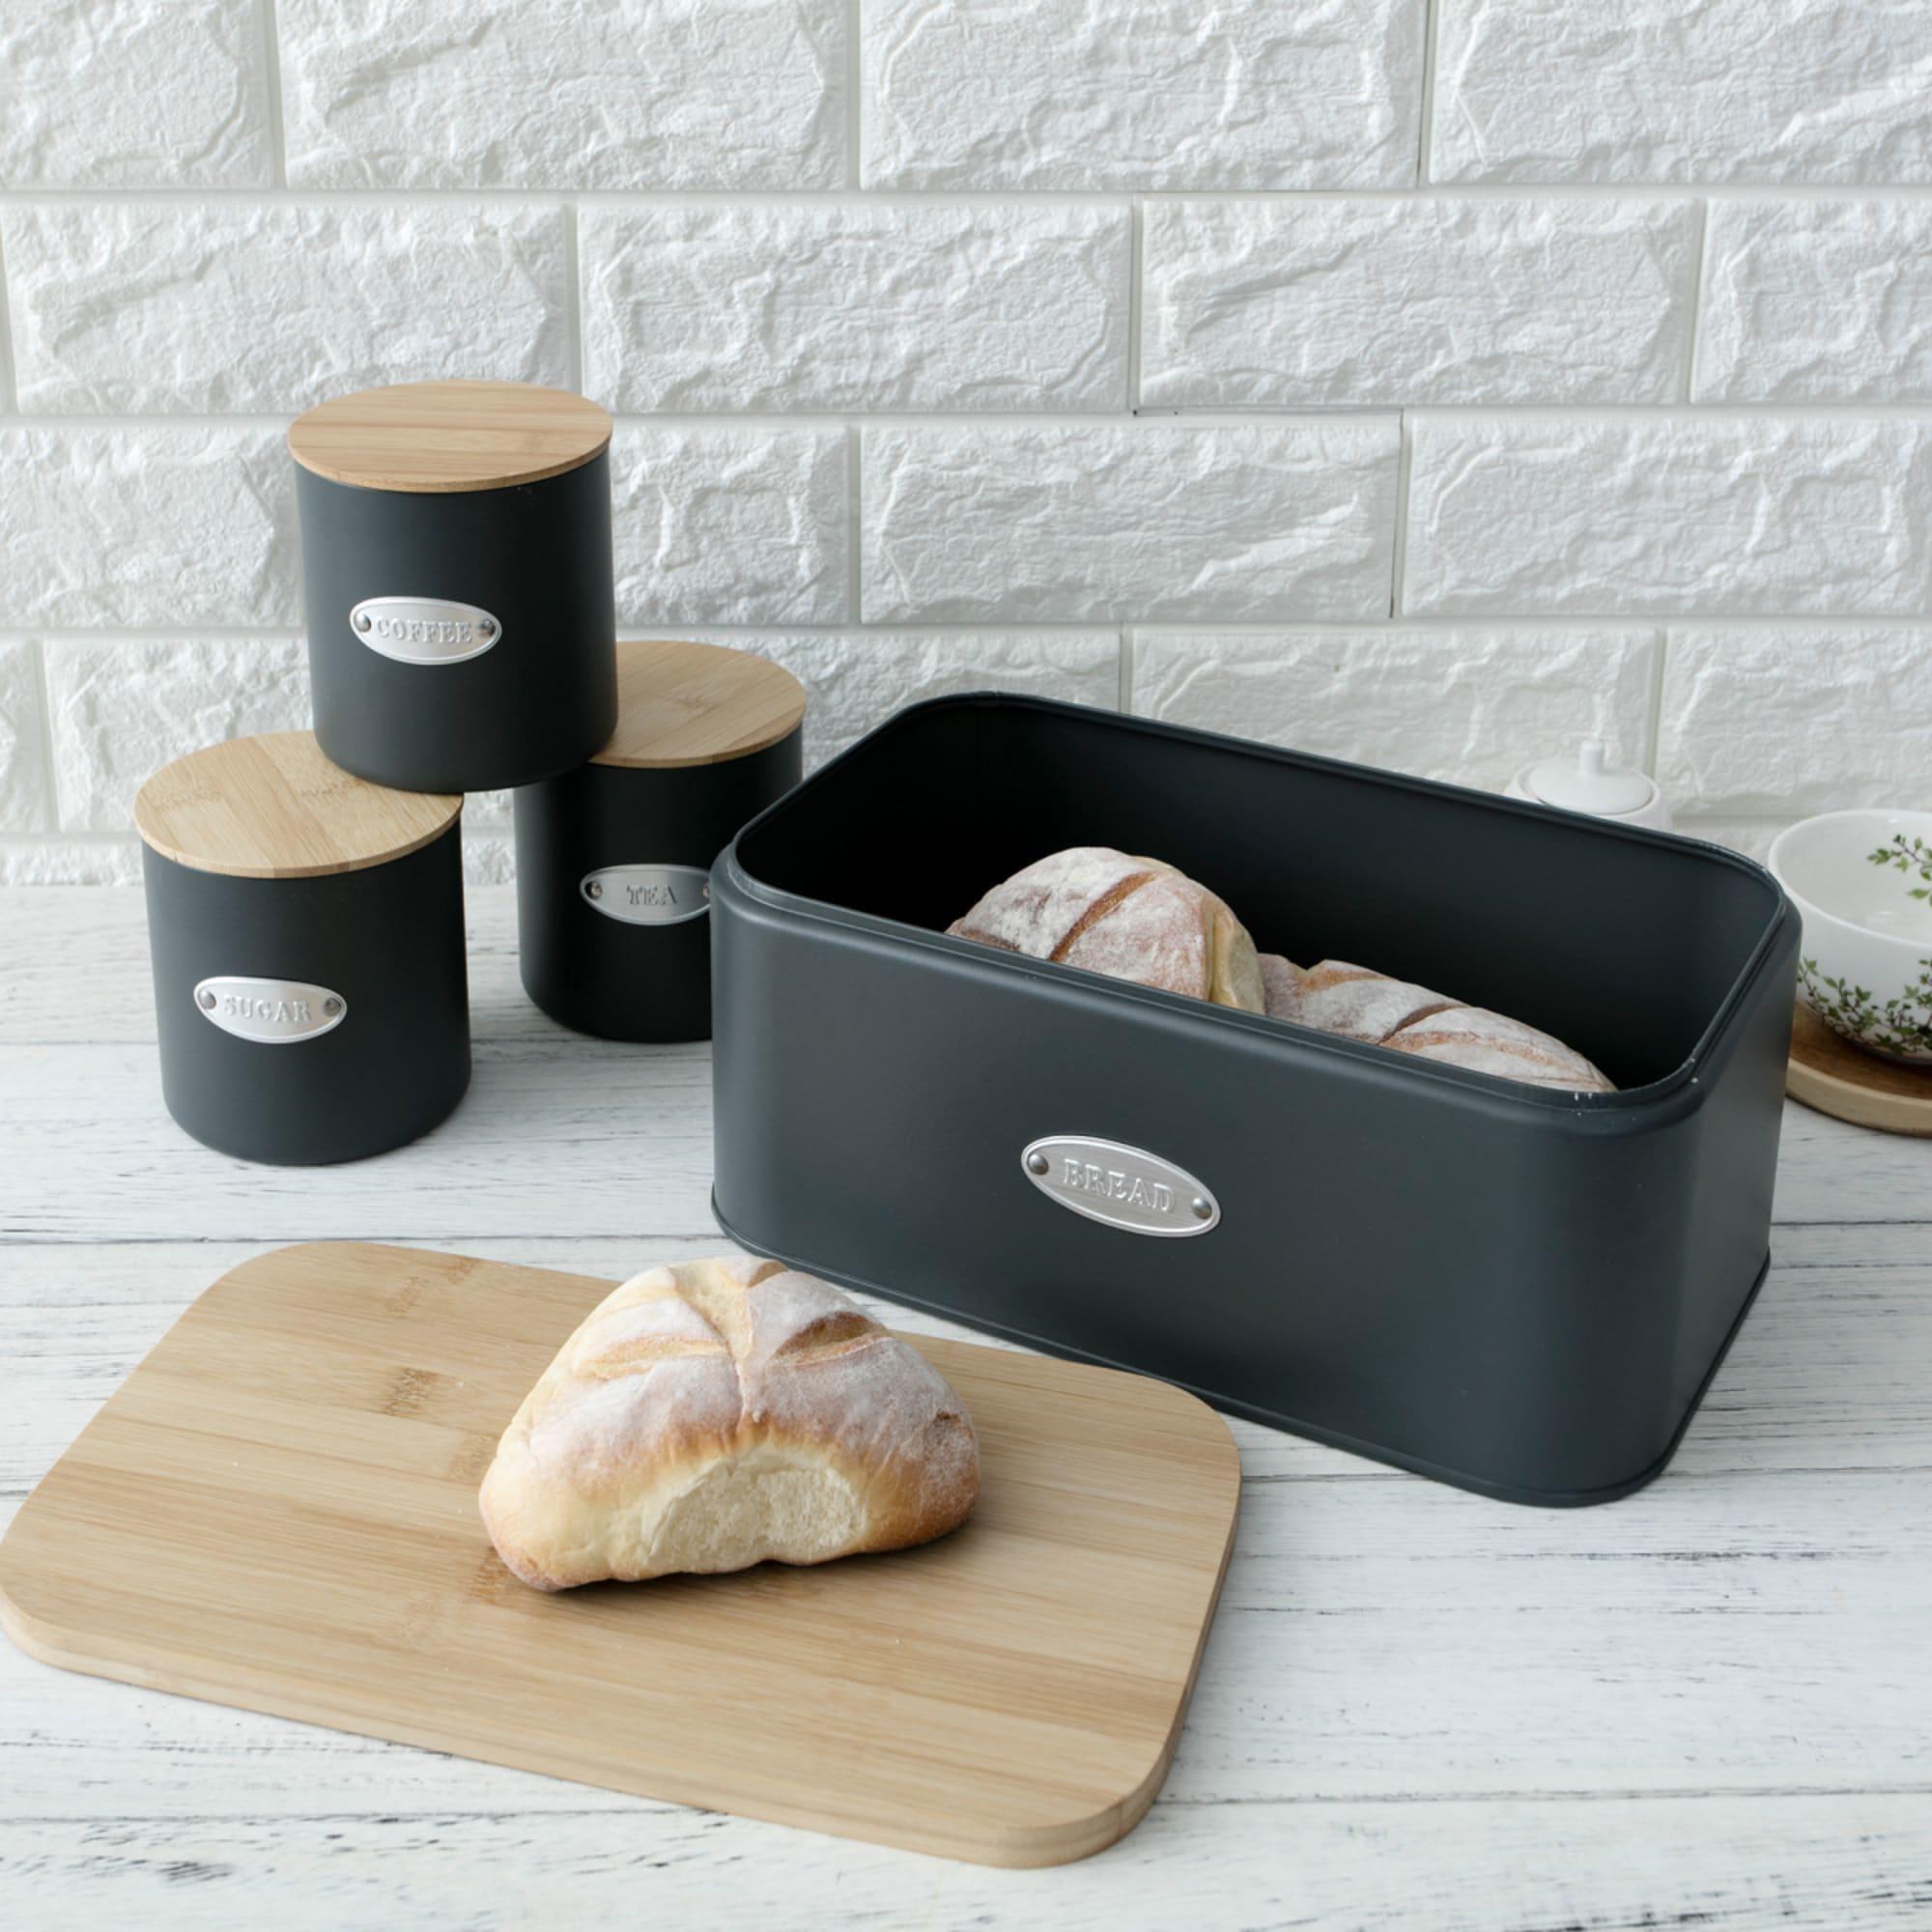 Sherwood Home Bread Box and Canister Set 4pc Image 3